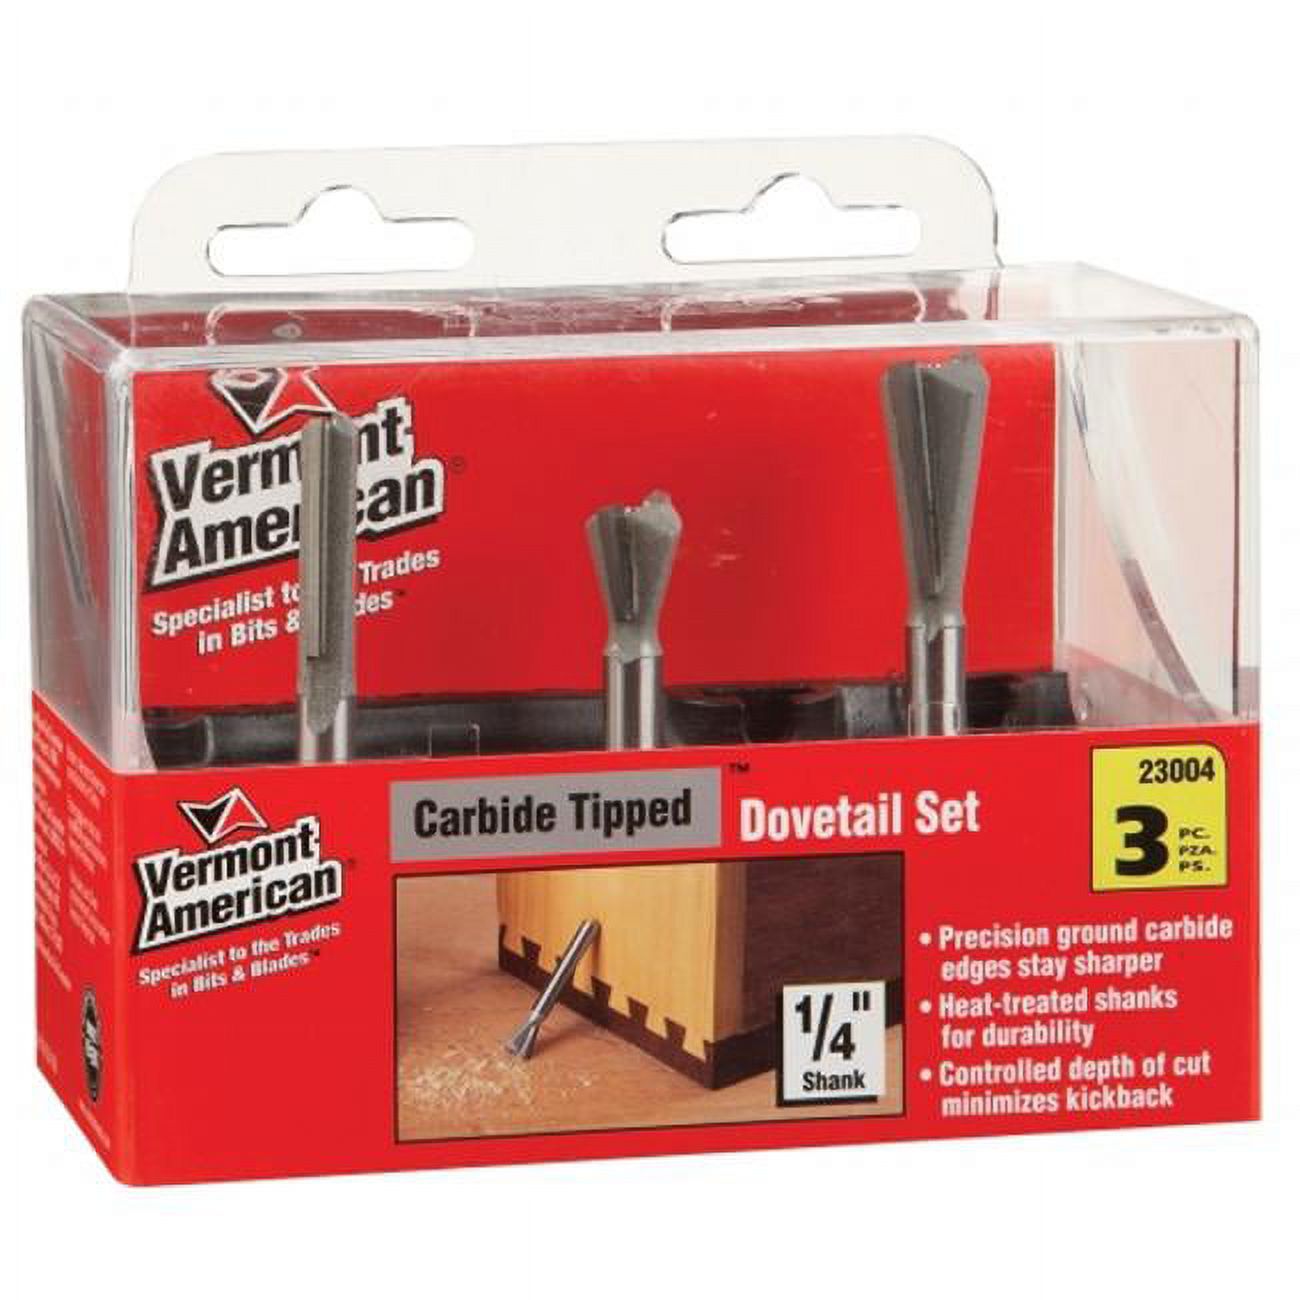 Vermont American 3 Piece Dovetail Router Bit Set  23004 - image 1 of 2